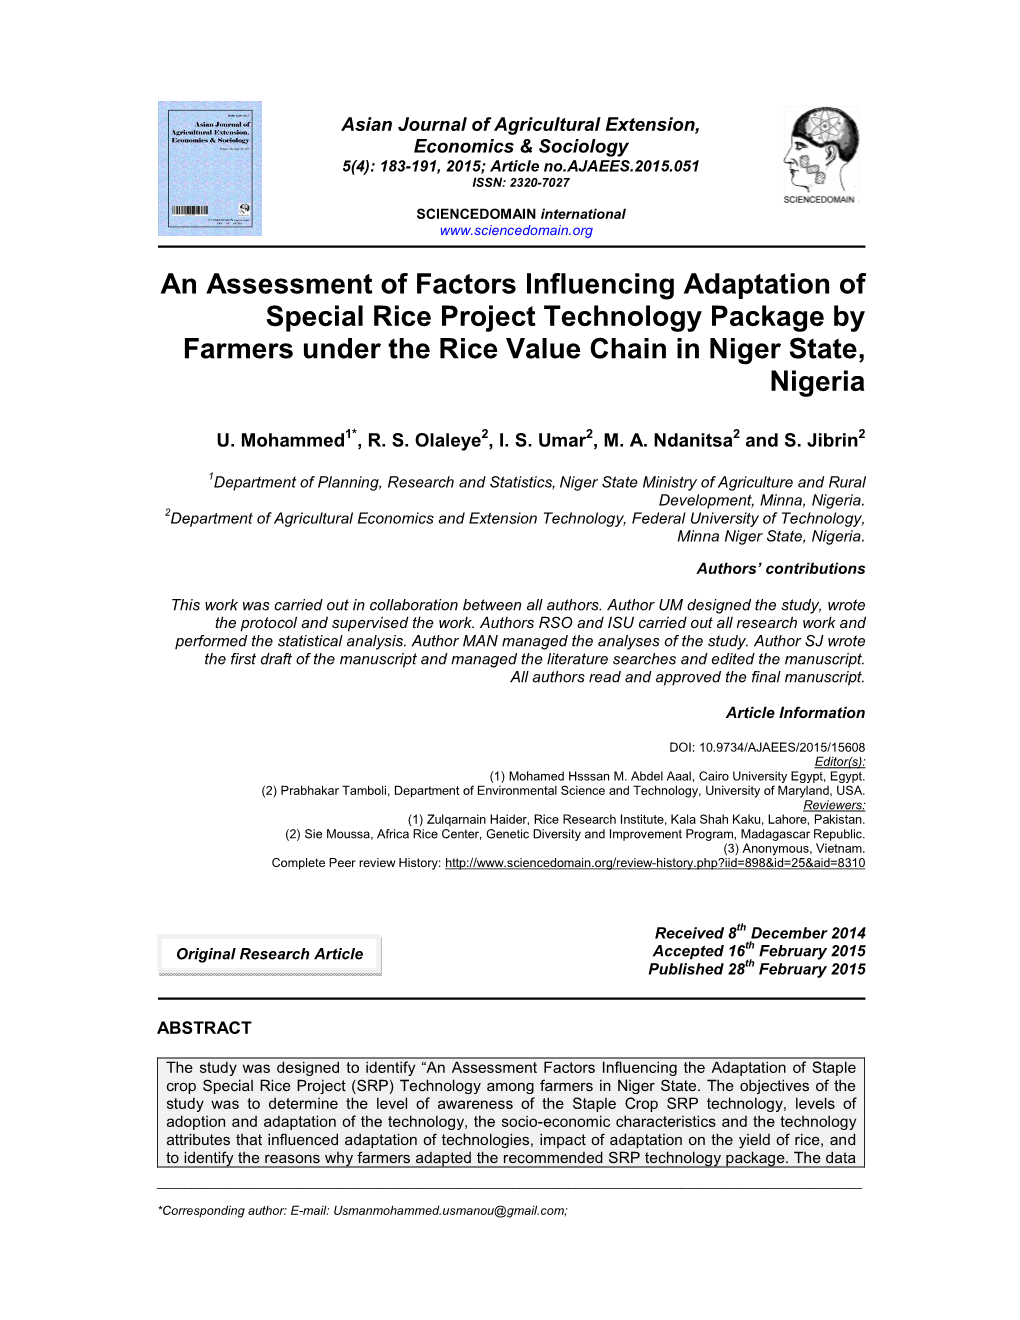 An Assessment of Factors Influencing Adaptation of Special Rice Project Technology Package by Farmers Under the Rice Value Chain in Niger State, Nigeria